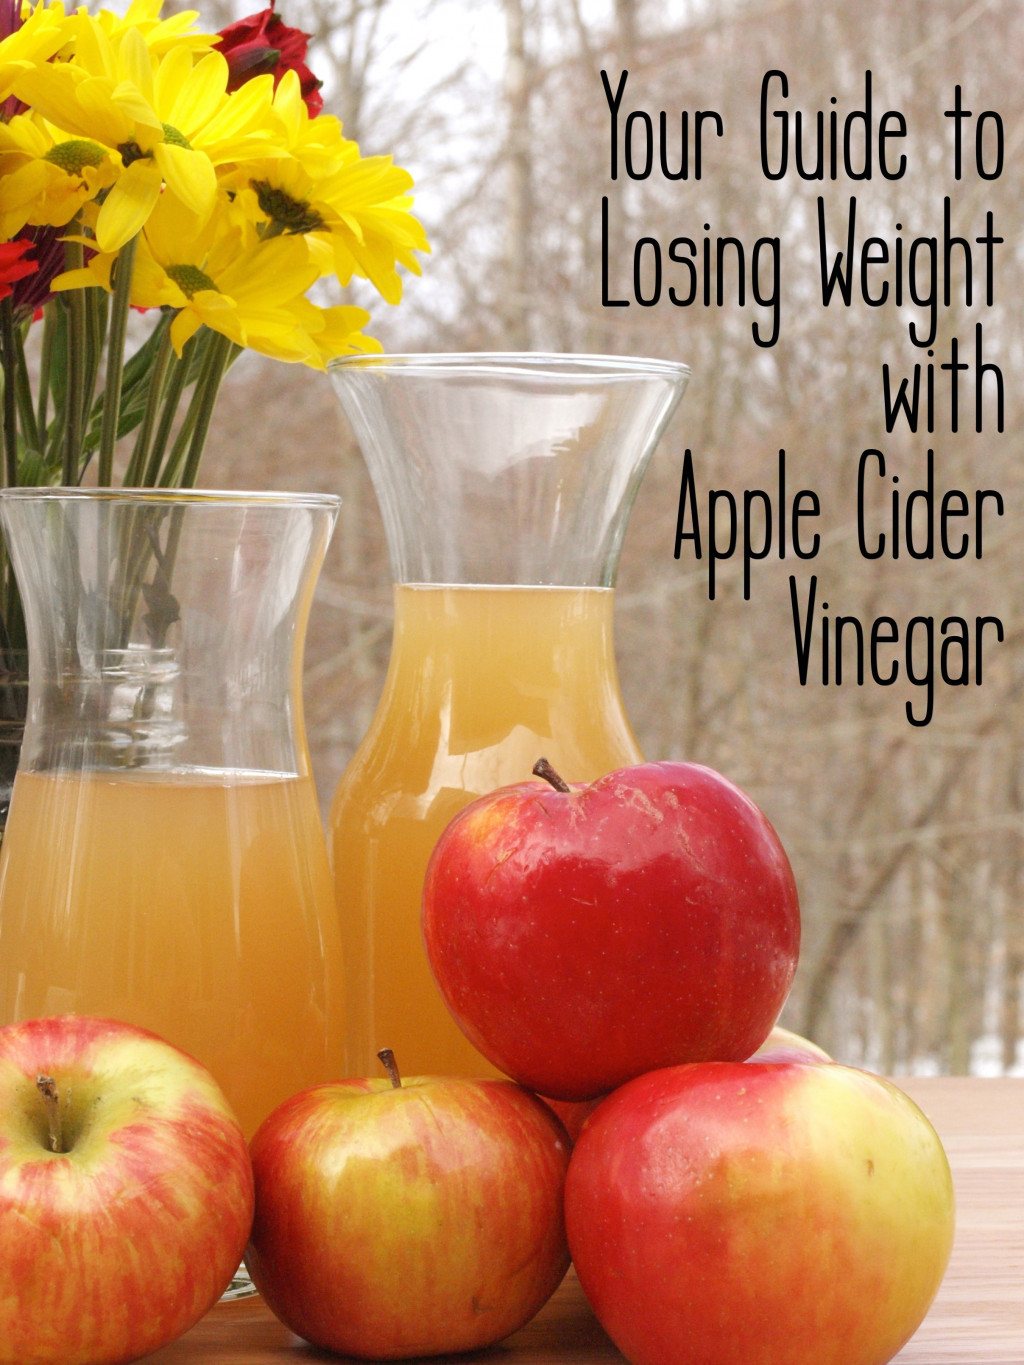 Apple Cider Vinegar To Lose Weight
 Read Before Drinking Apple Cider Vinegar for Weight Loss